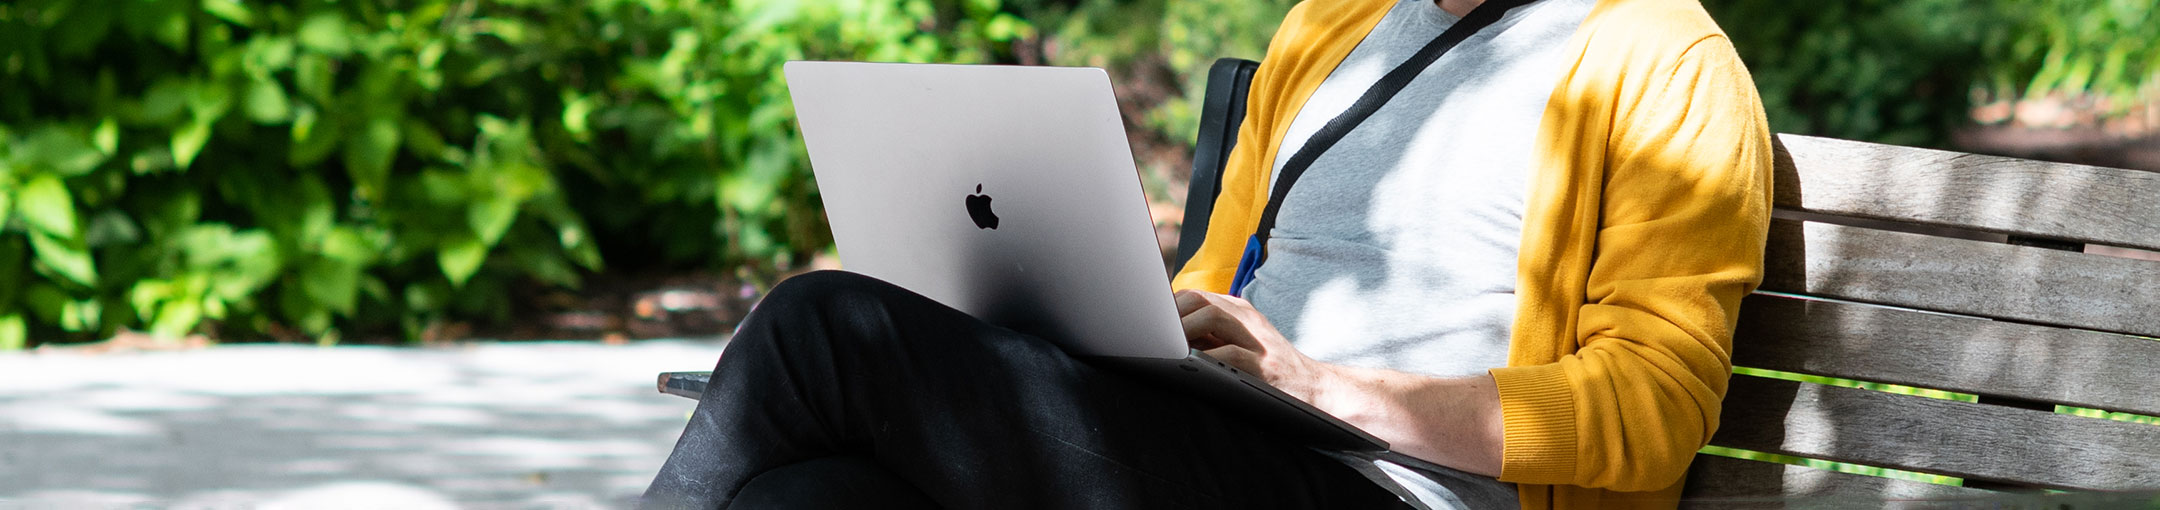 a person sits on a bench in a park and works on their laptop